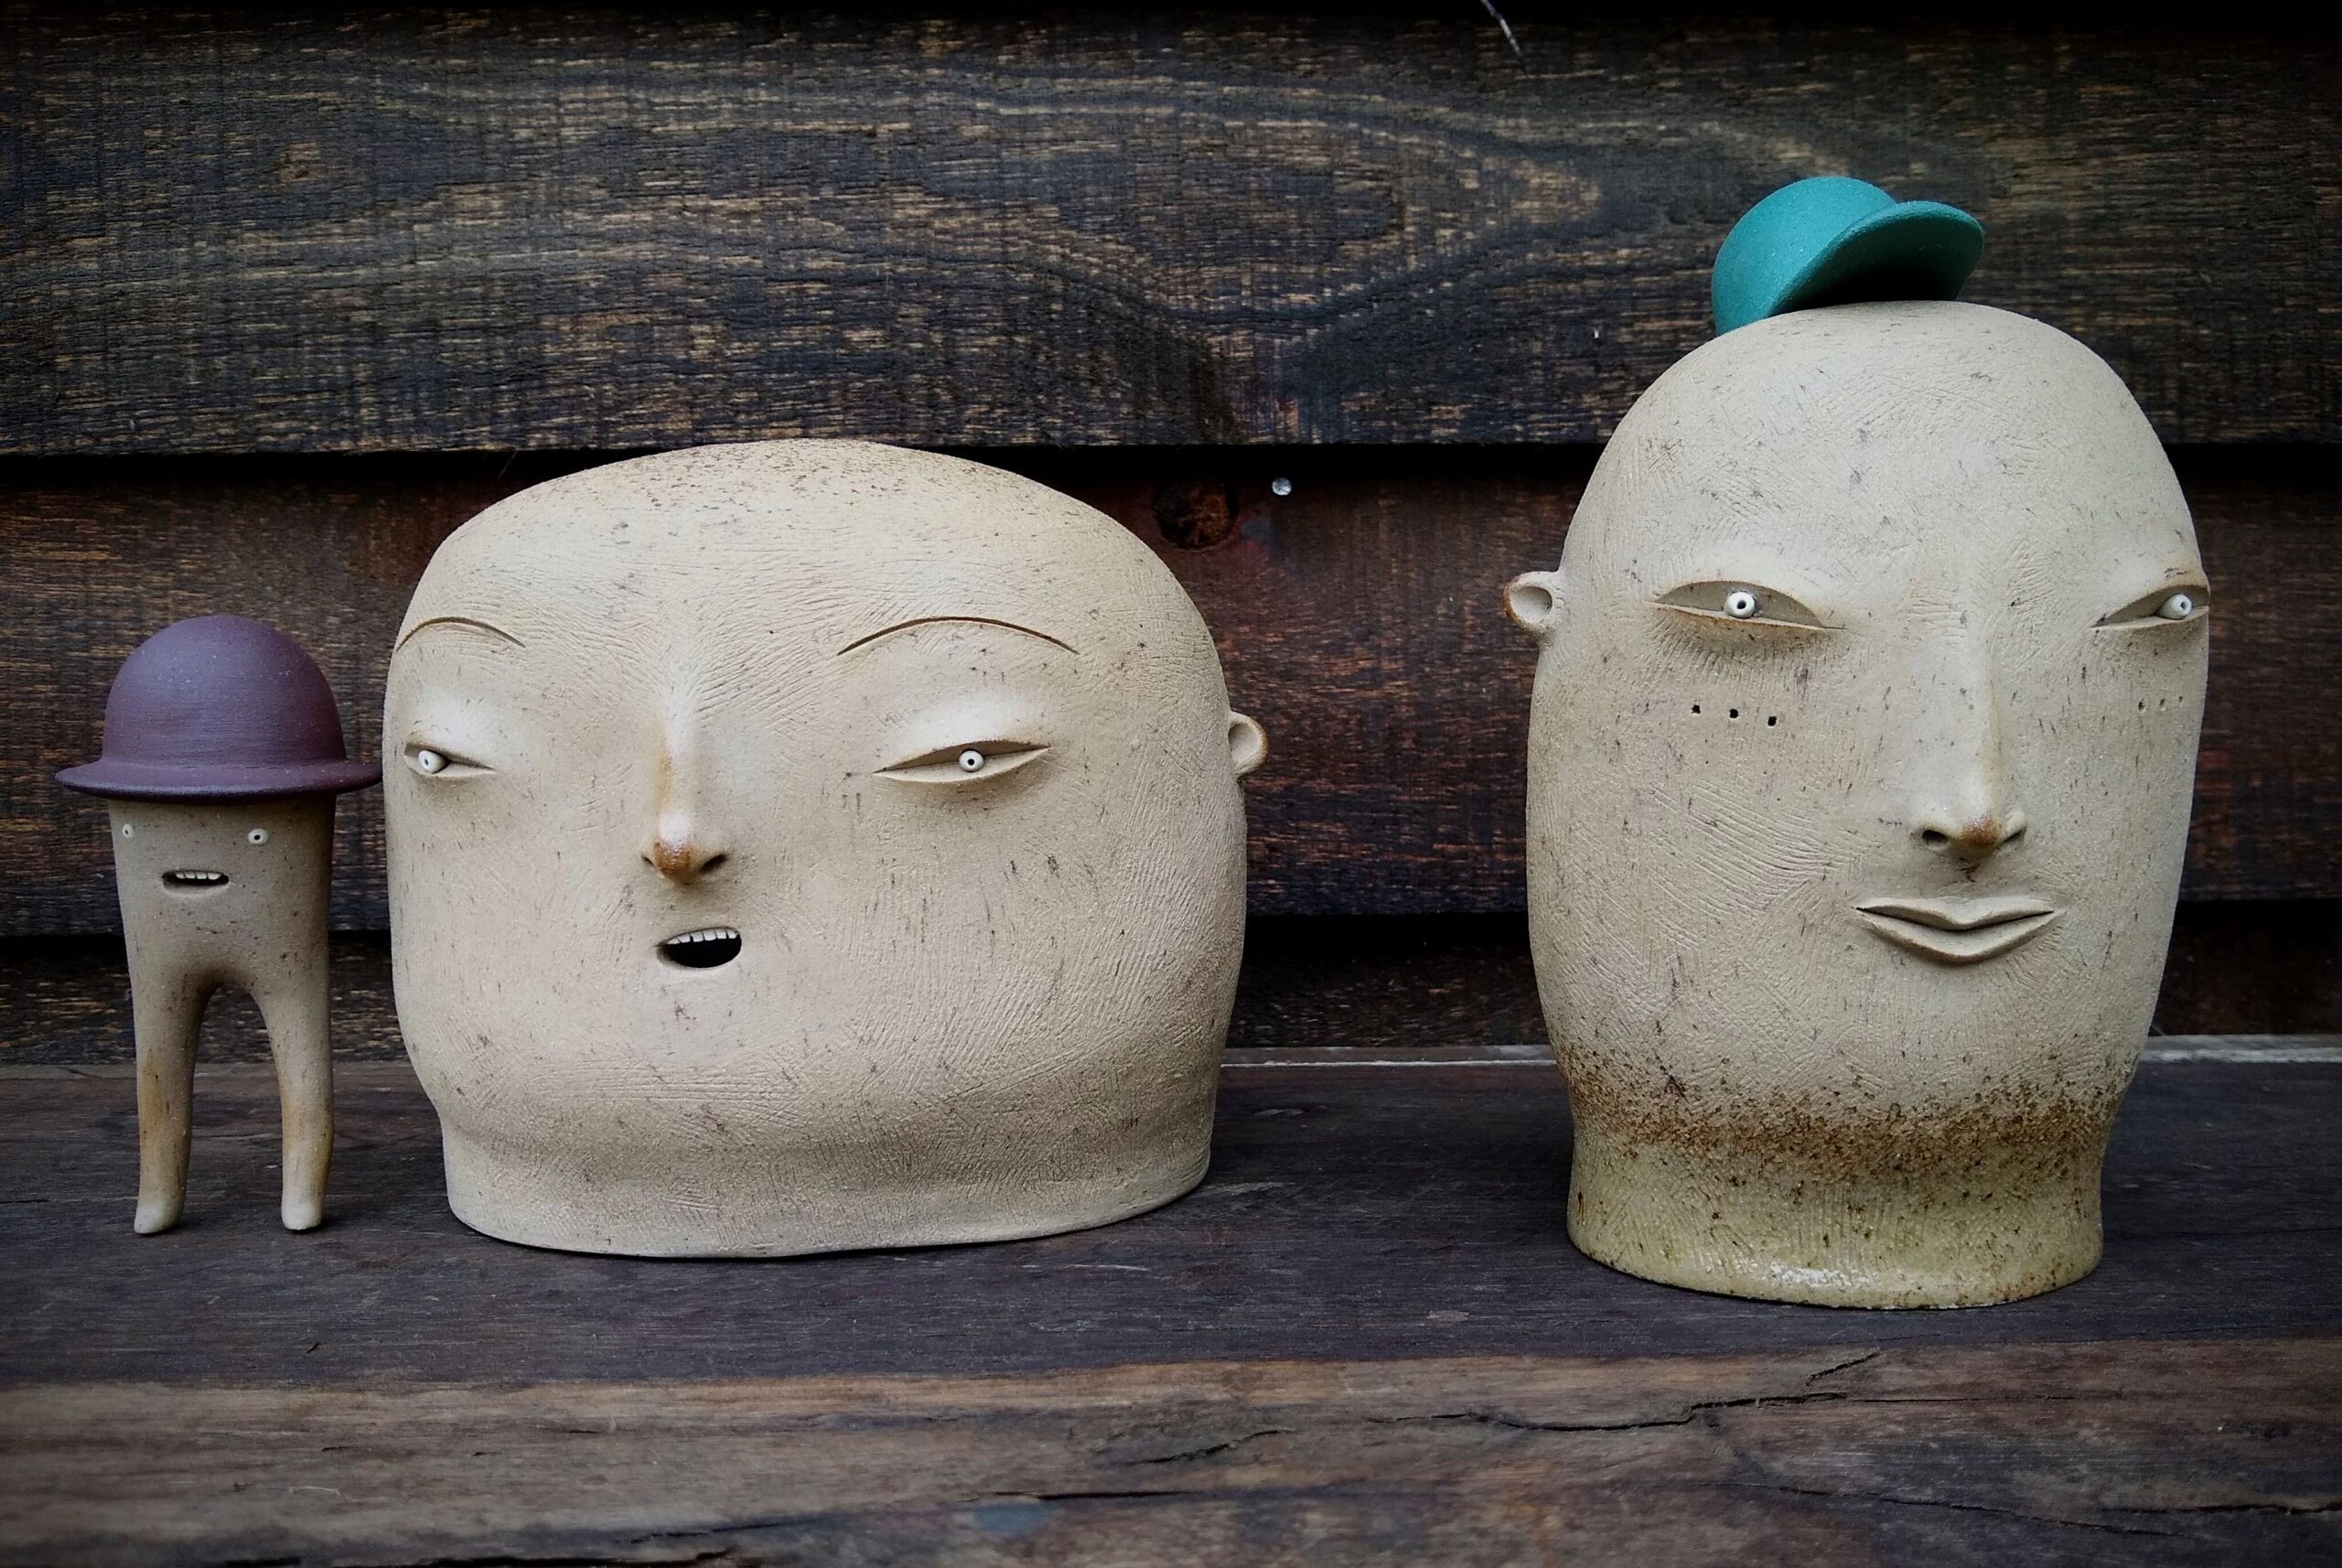 Two large ceramic heads sit next to each other on a wooden surface. A small figure with only two legs stands to the left, wearing a small hat. The large head on the right wears a small hat as well.